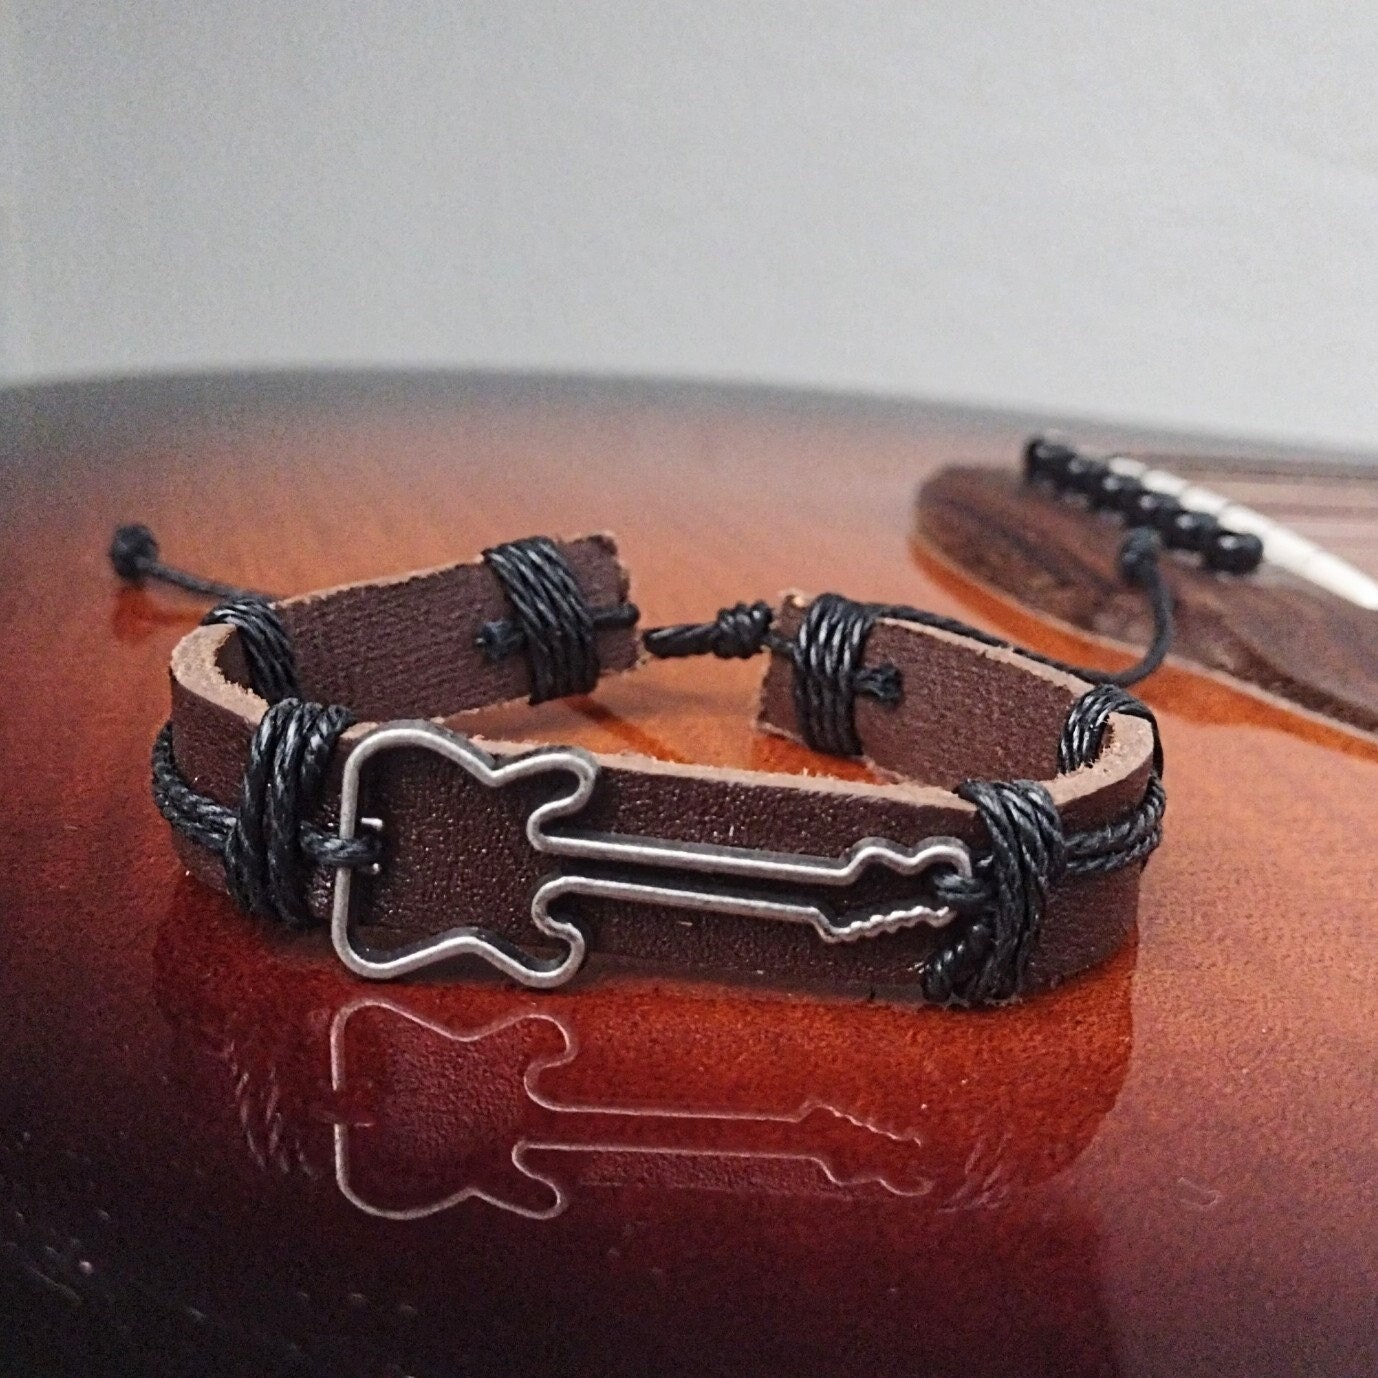 Guitar String Bracelet With Guitar Charm, Bangle Bracelet, Stacking Bracelet,  Custom Color, Musician Gift, Recycled Jewelry - Etsy